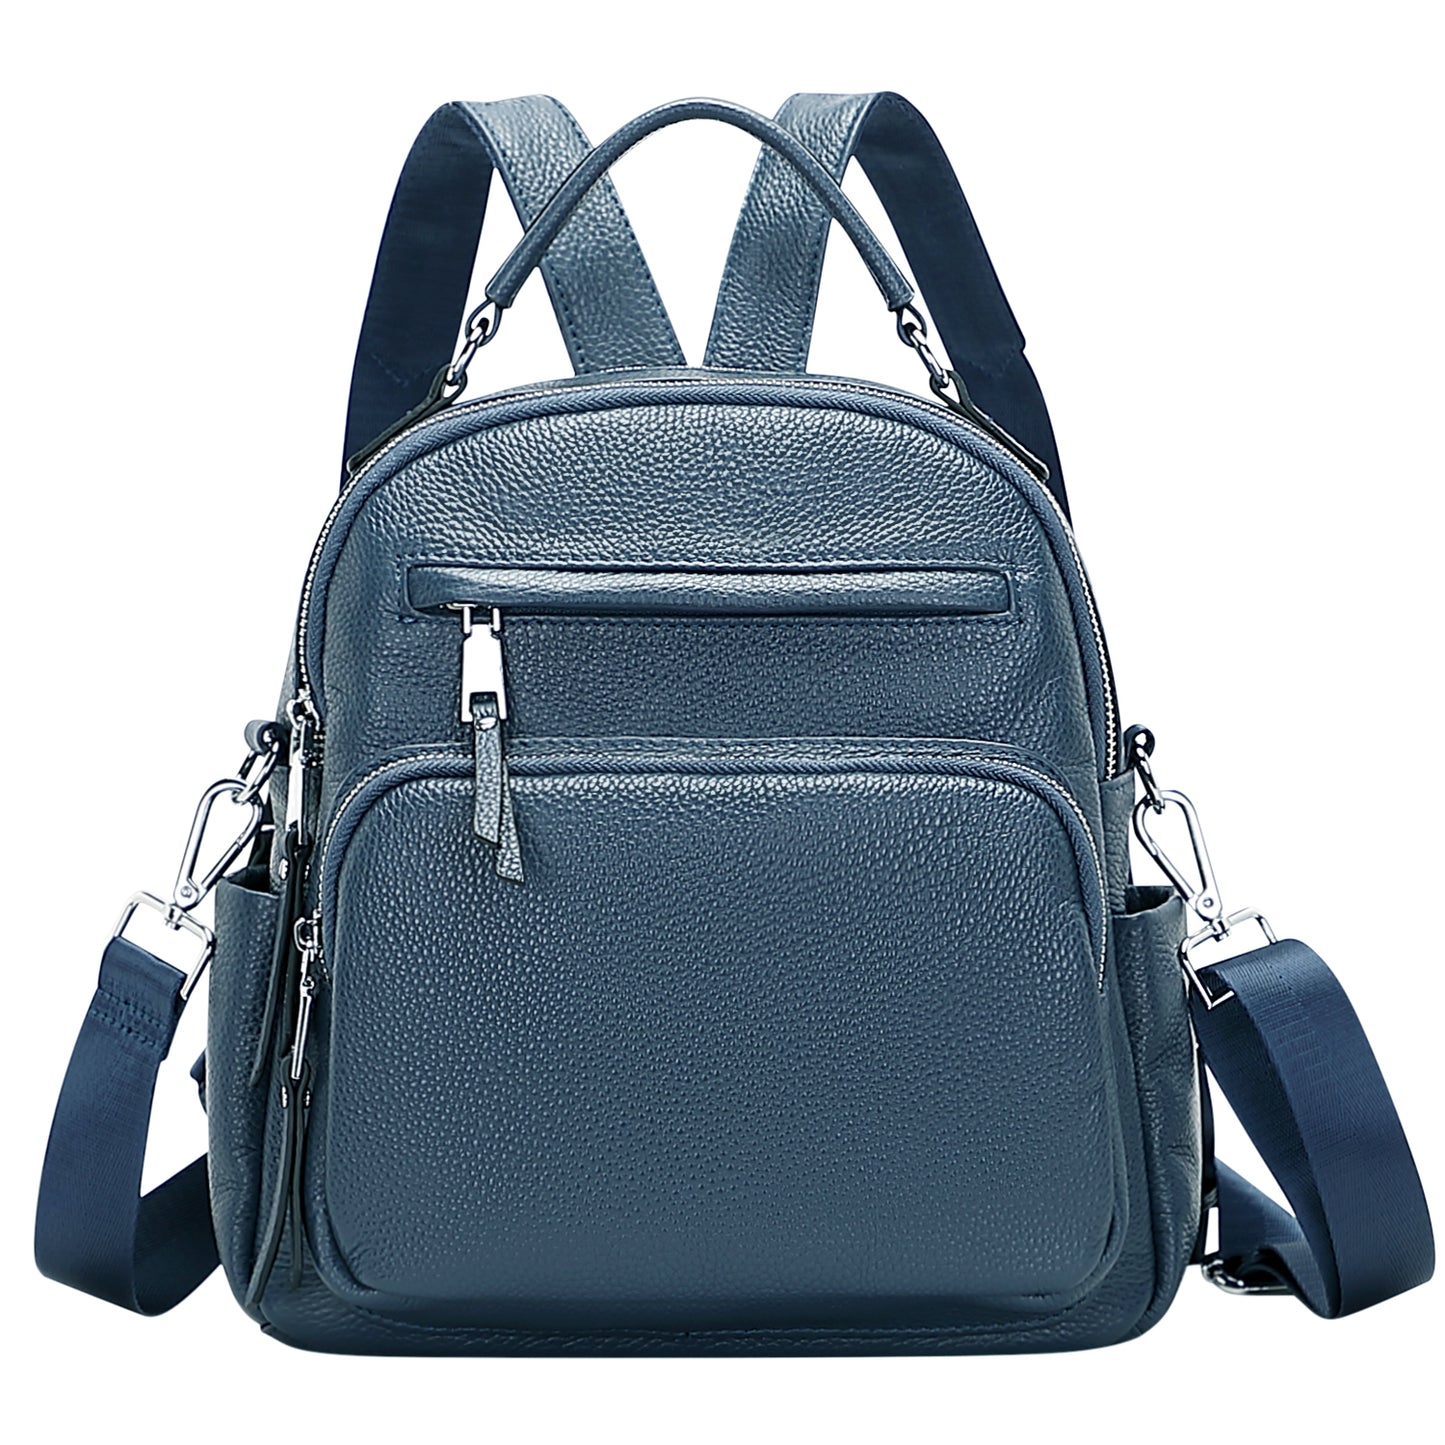 Luxury Leather Laptop Backpack With Detachable Crossbody Bag – LOTTA PIECES  clothing & accessories